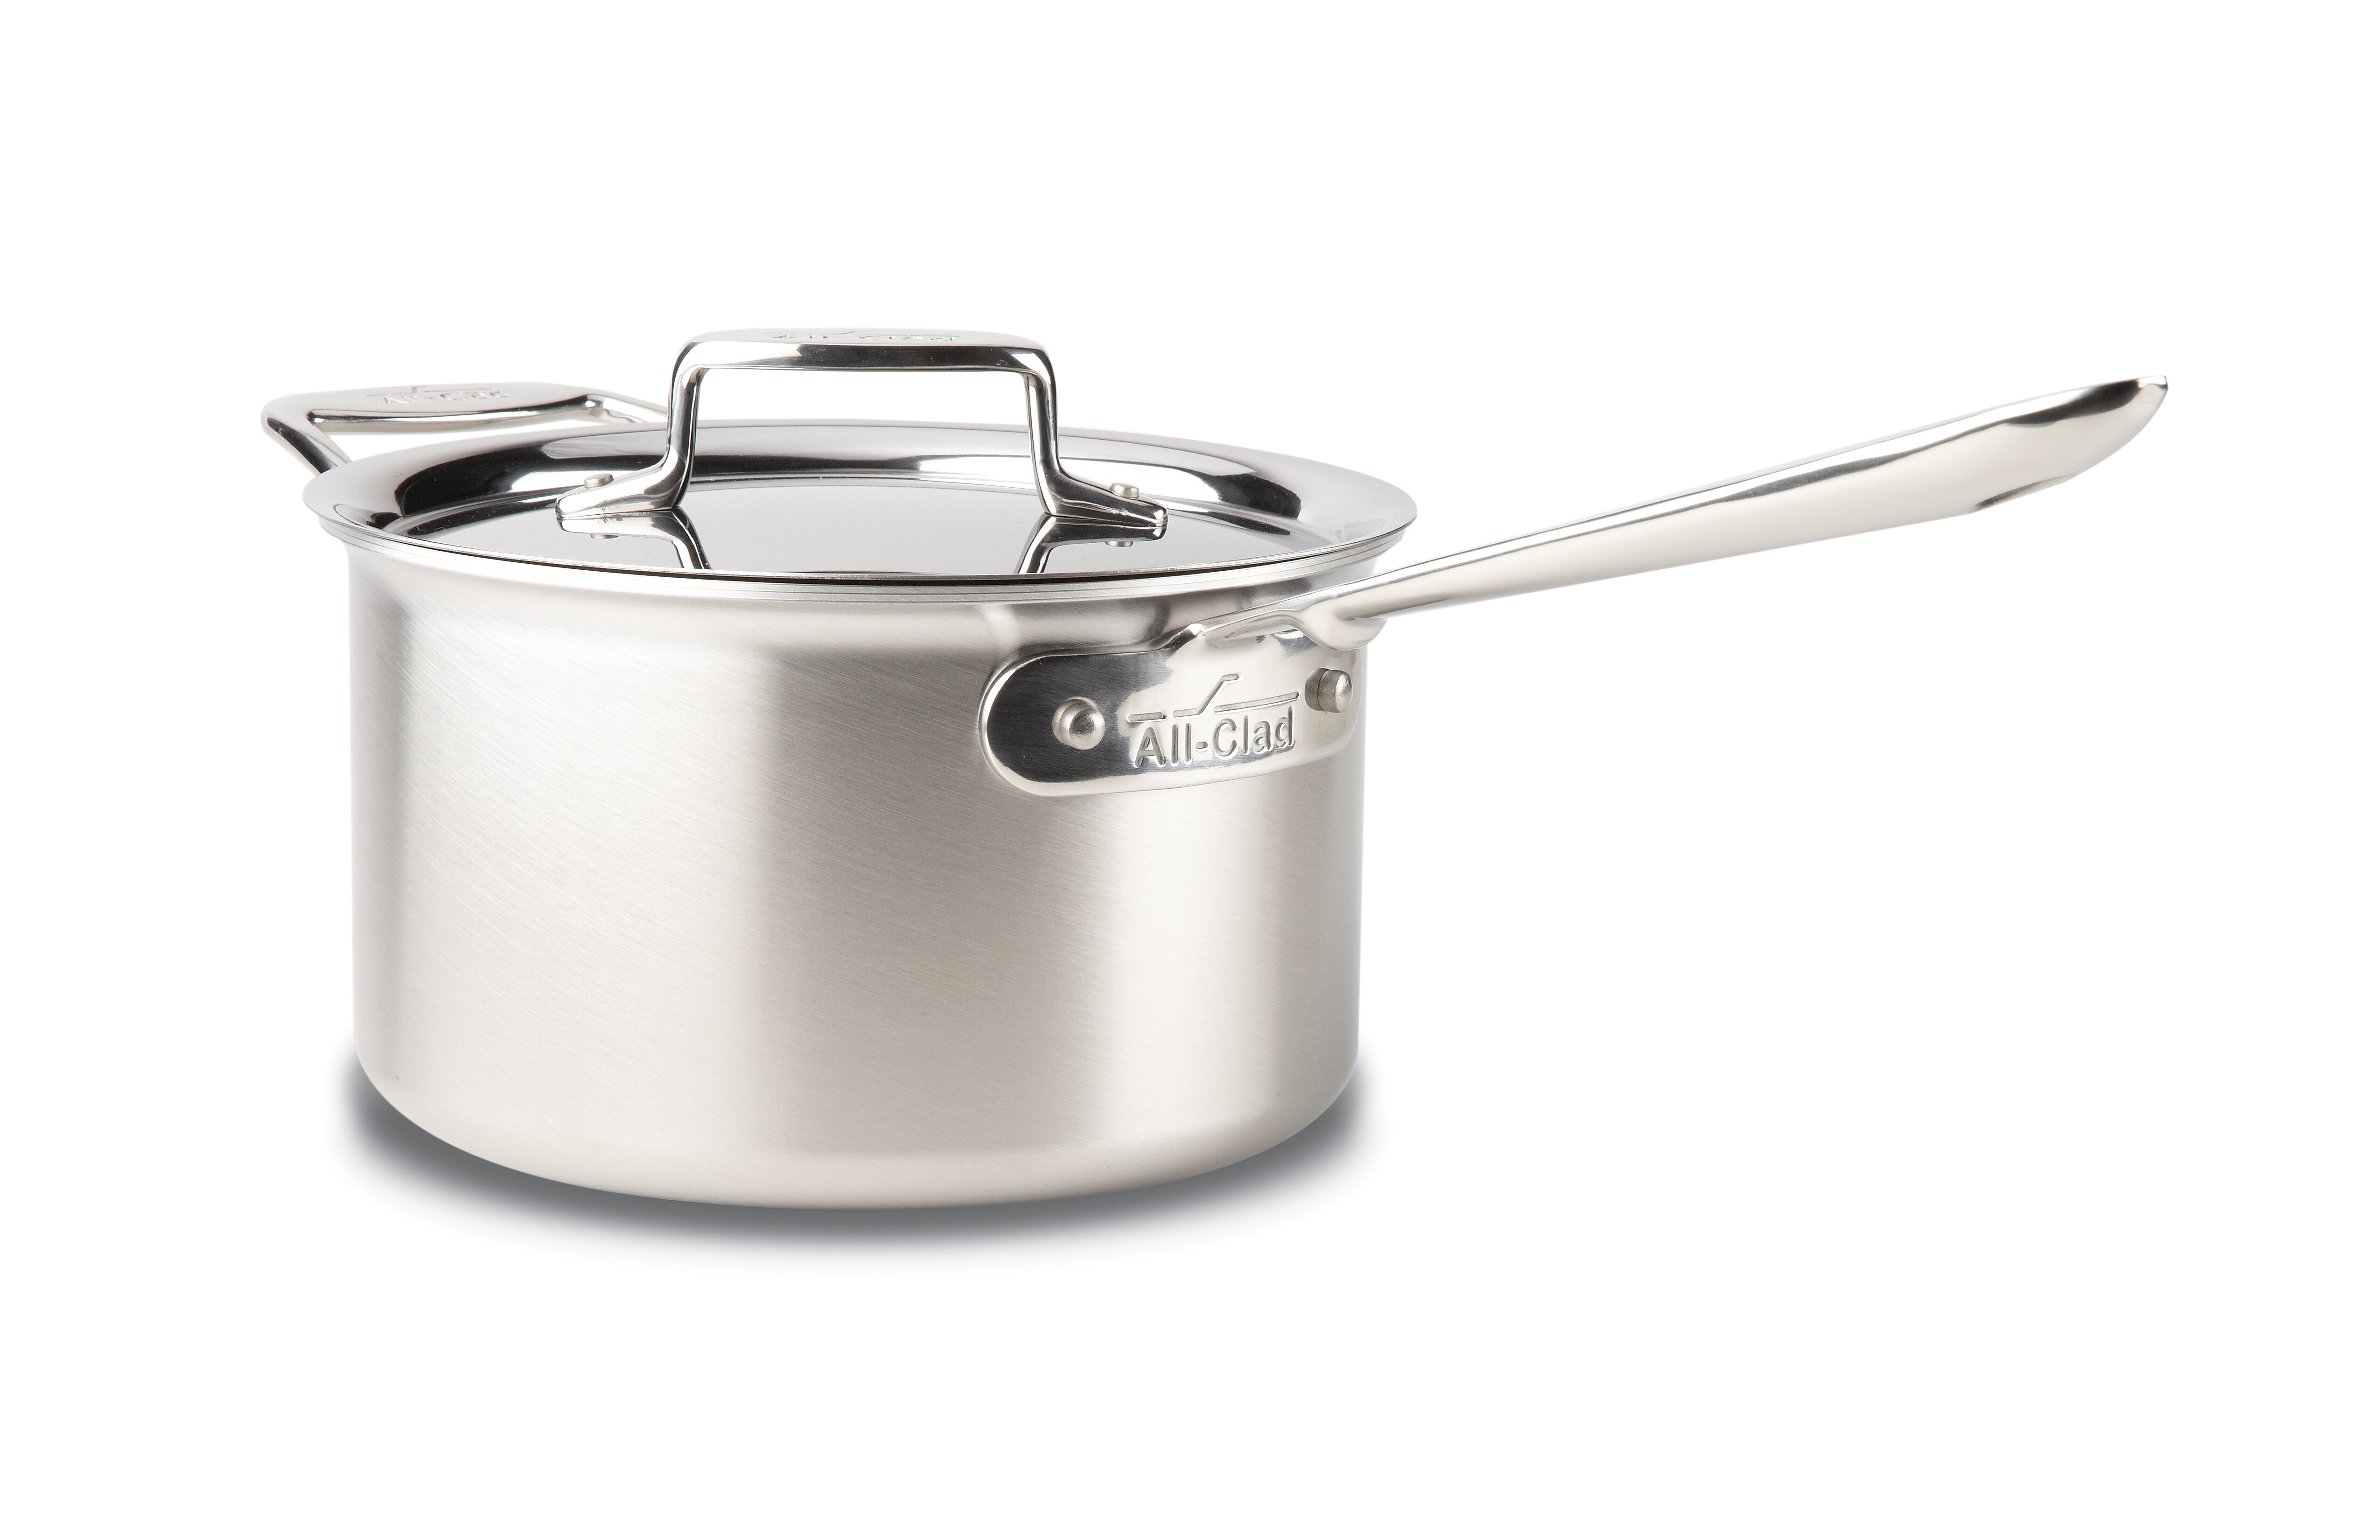 All-Clad Stainless Steel Saucepan with Lid & Reviews